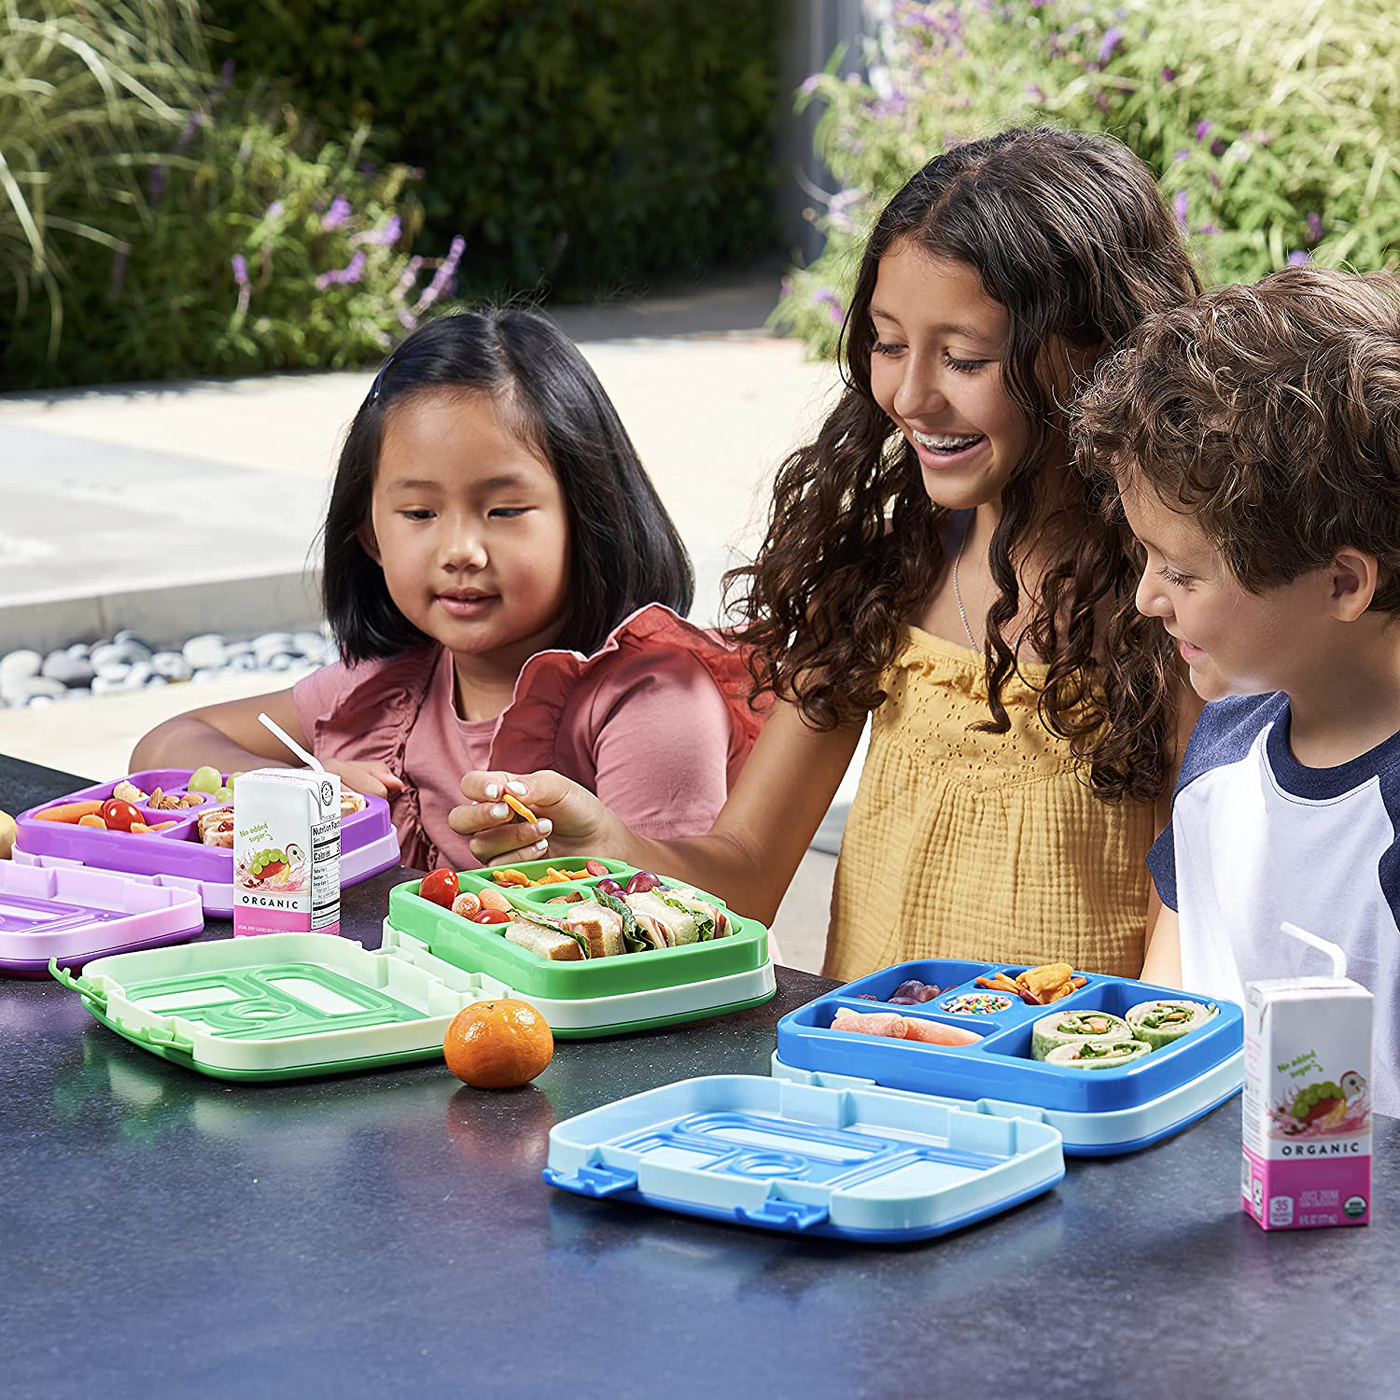 Bentgo Kids Children’s Lunch Box - Leak-Proof, 5-Compartment Bento-Style Kids Lunch Box - Ideal Portion Sizes for Ages 3 to 7 - BPA-Free, Dishwasher Safe, Food-Safe Materials (Purple)